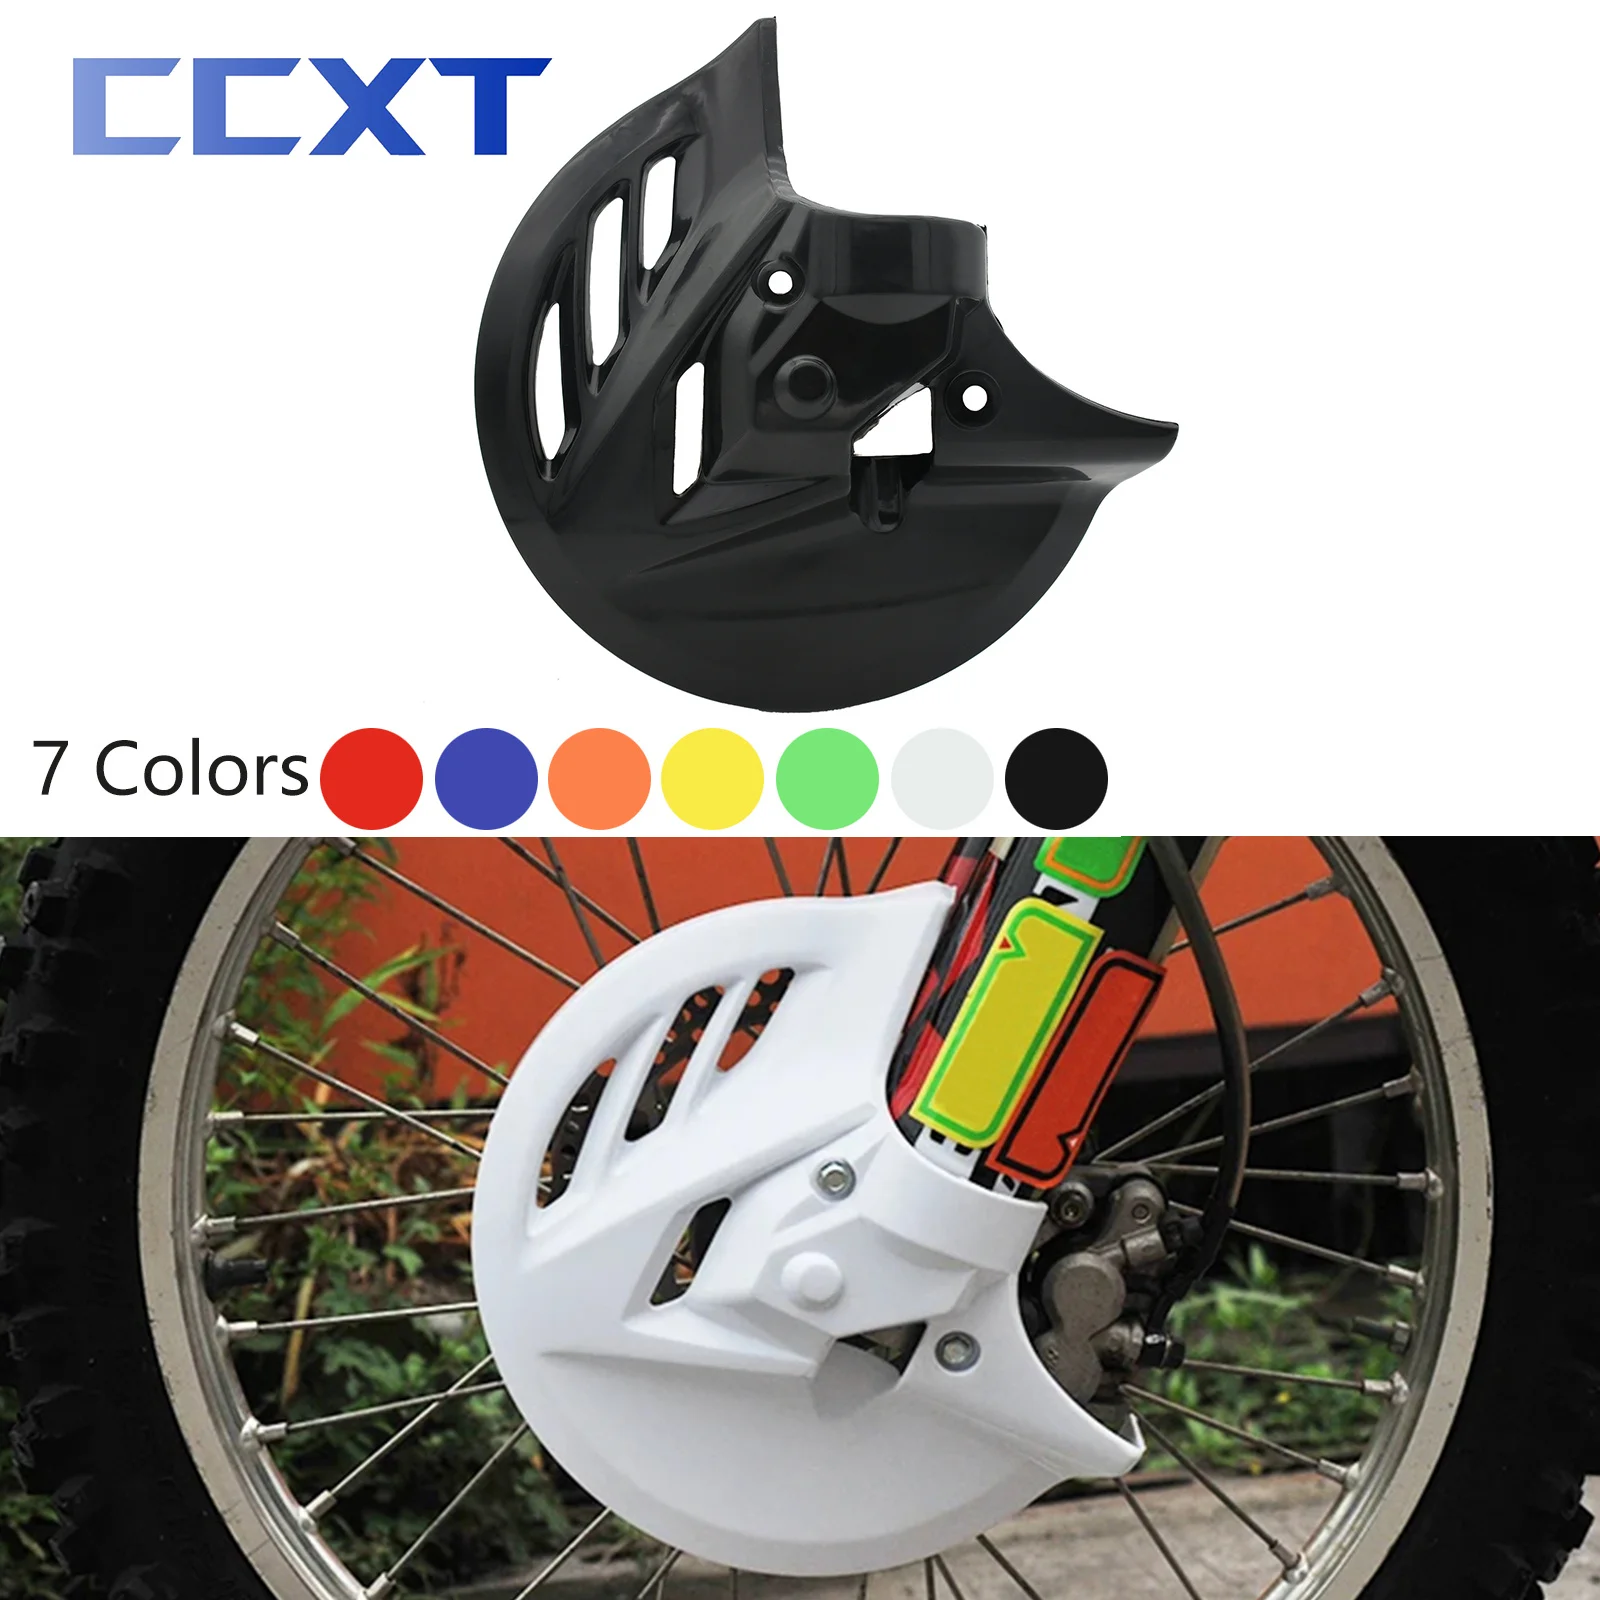 Motorcycle Brake Disc Protection Cover Plastic Protective Cover For Honda - $16.00+